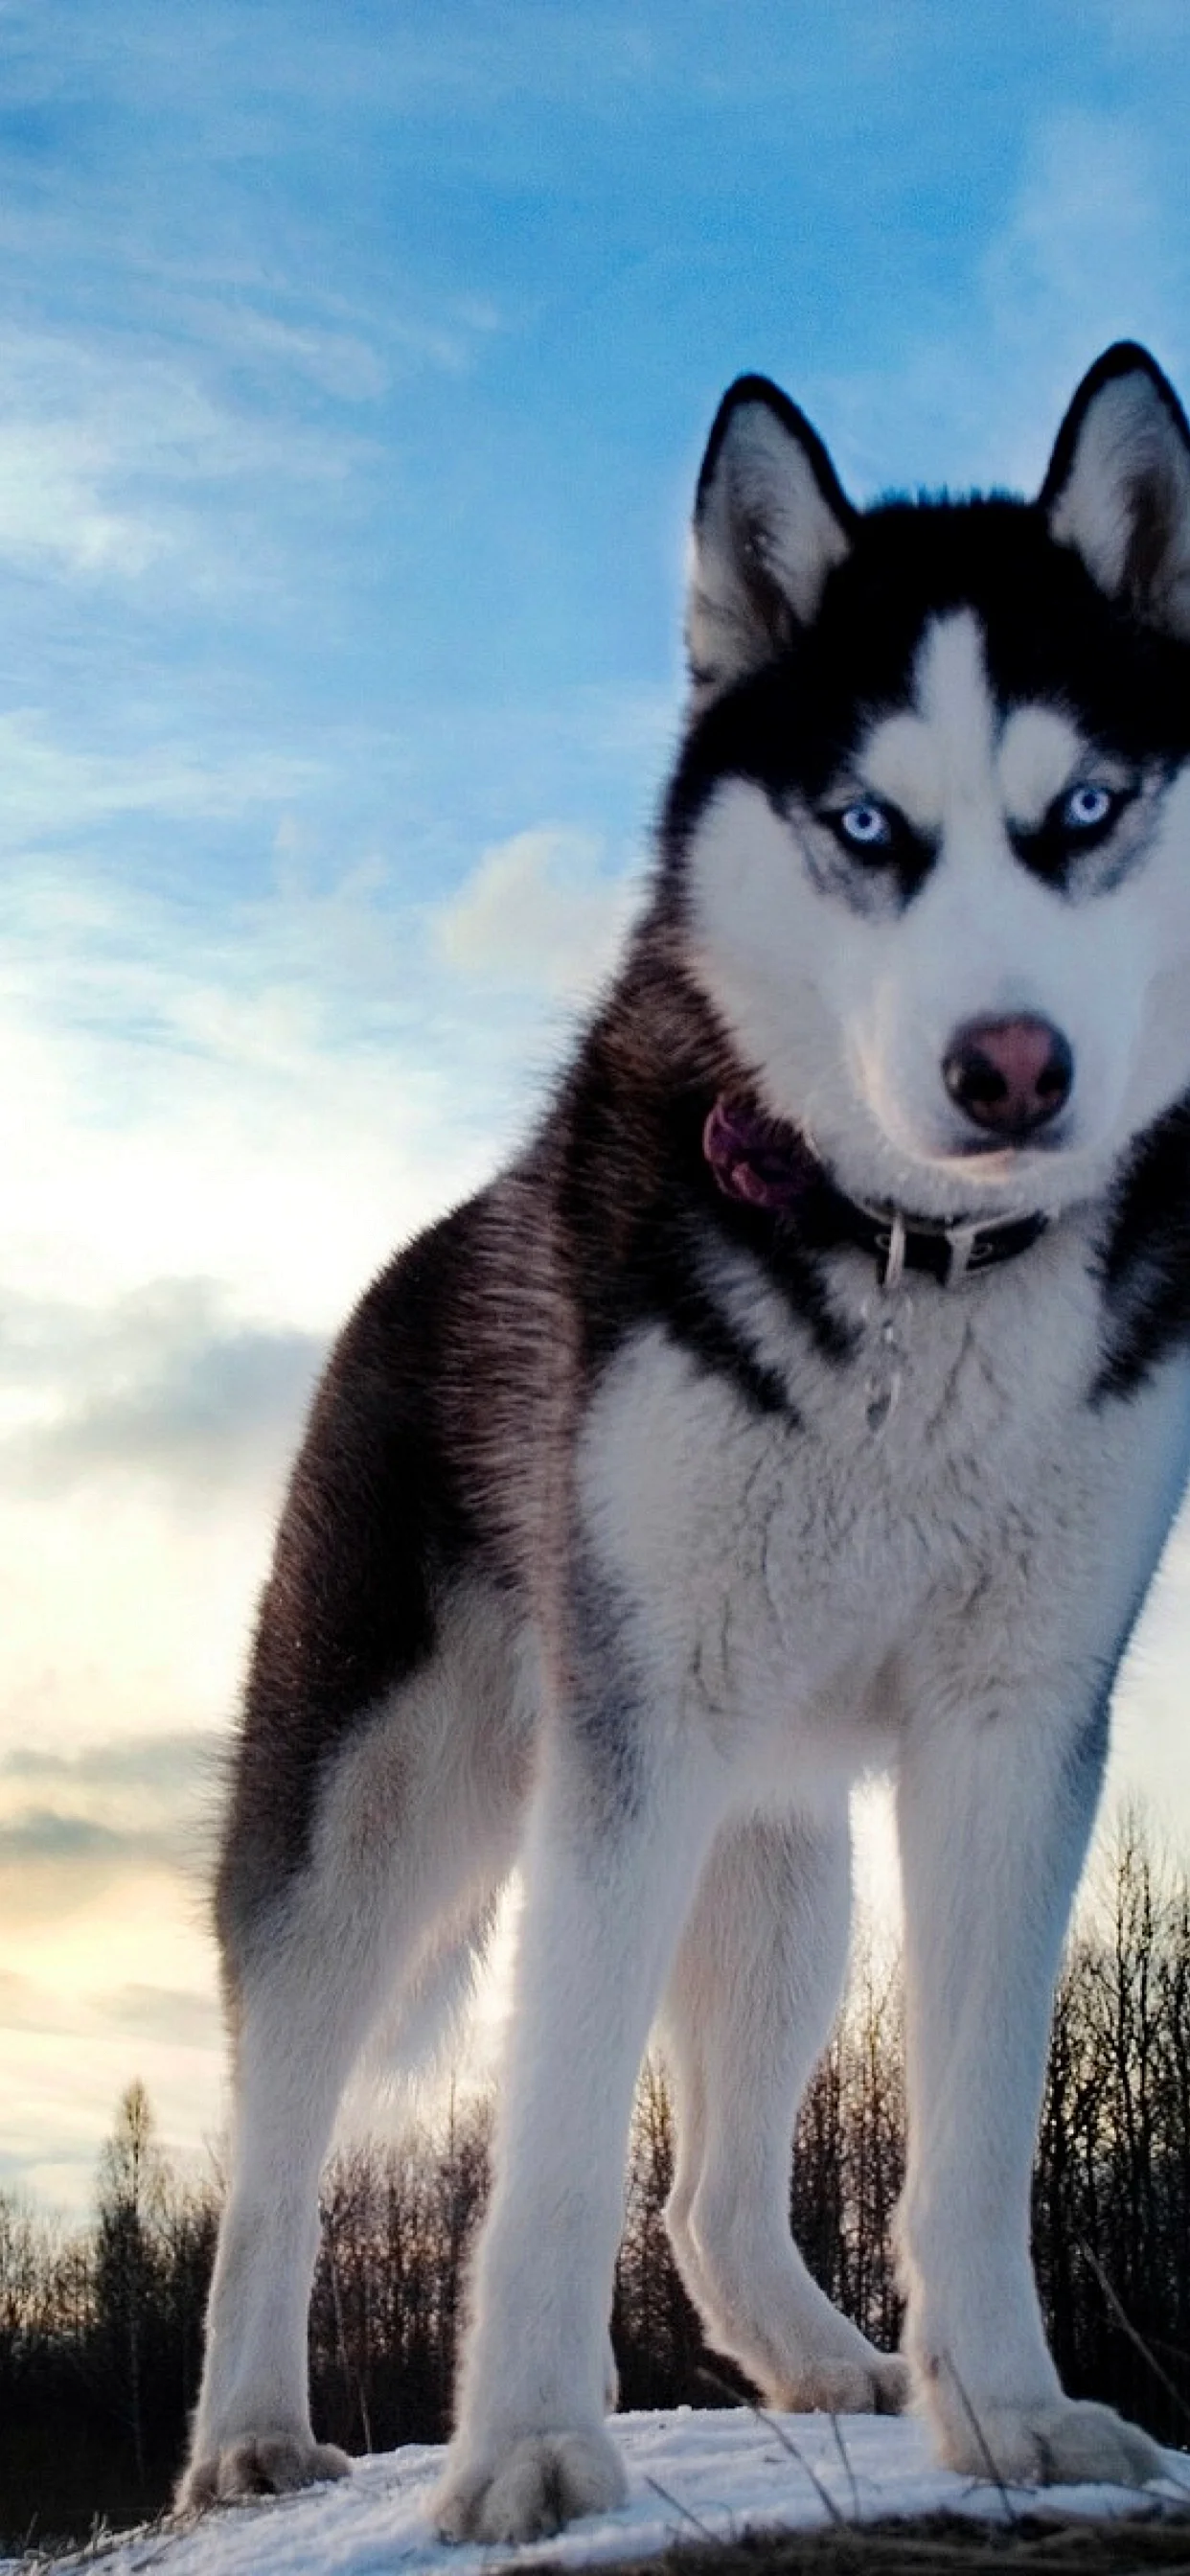 Husky Dog Wallpaper for iPhone 11 Pro Max